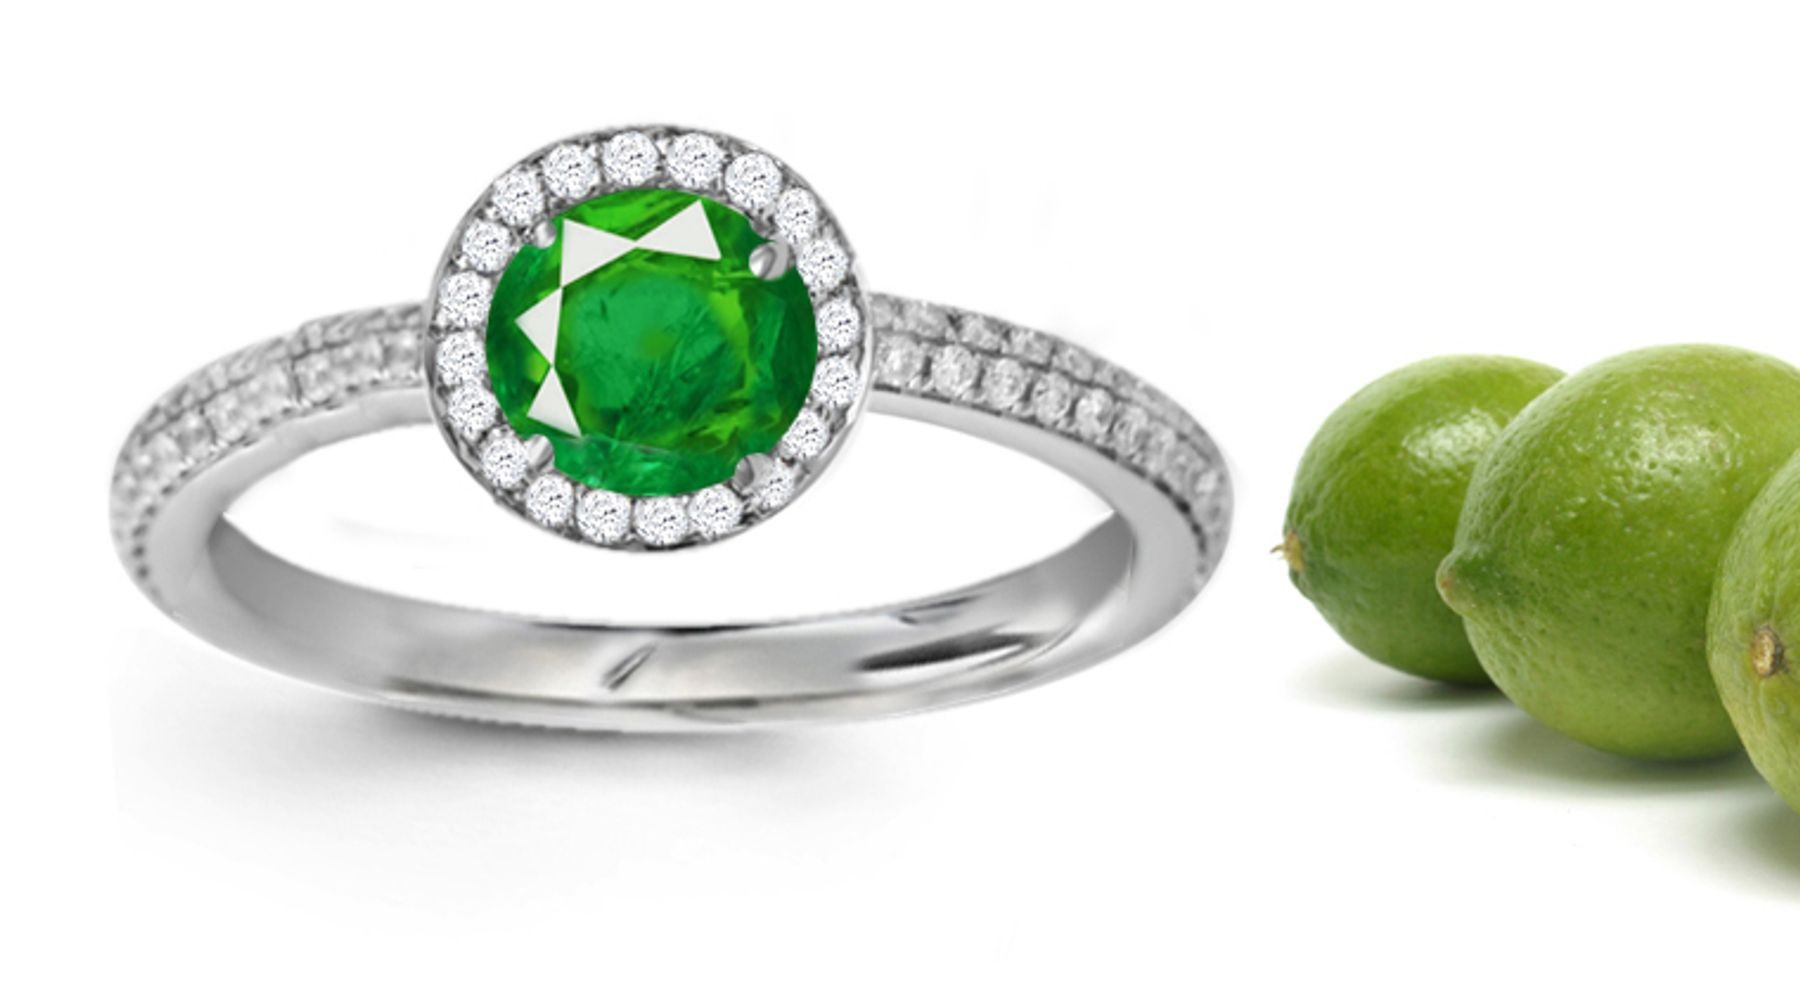 This Ring Features Round Emerald & A Diamond Halo Creating Light & Shadow